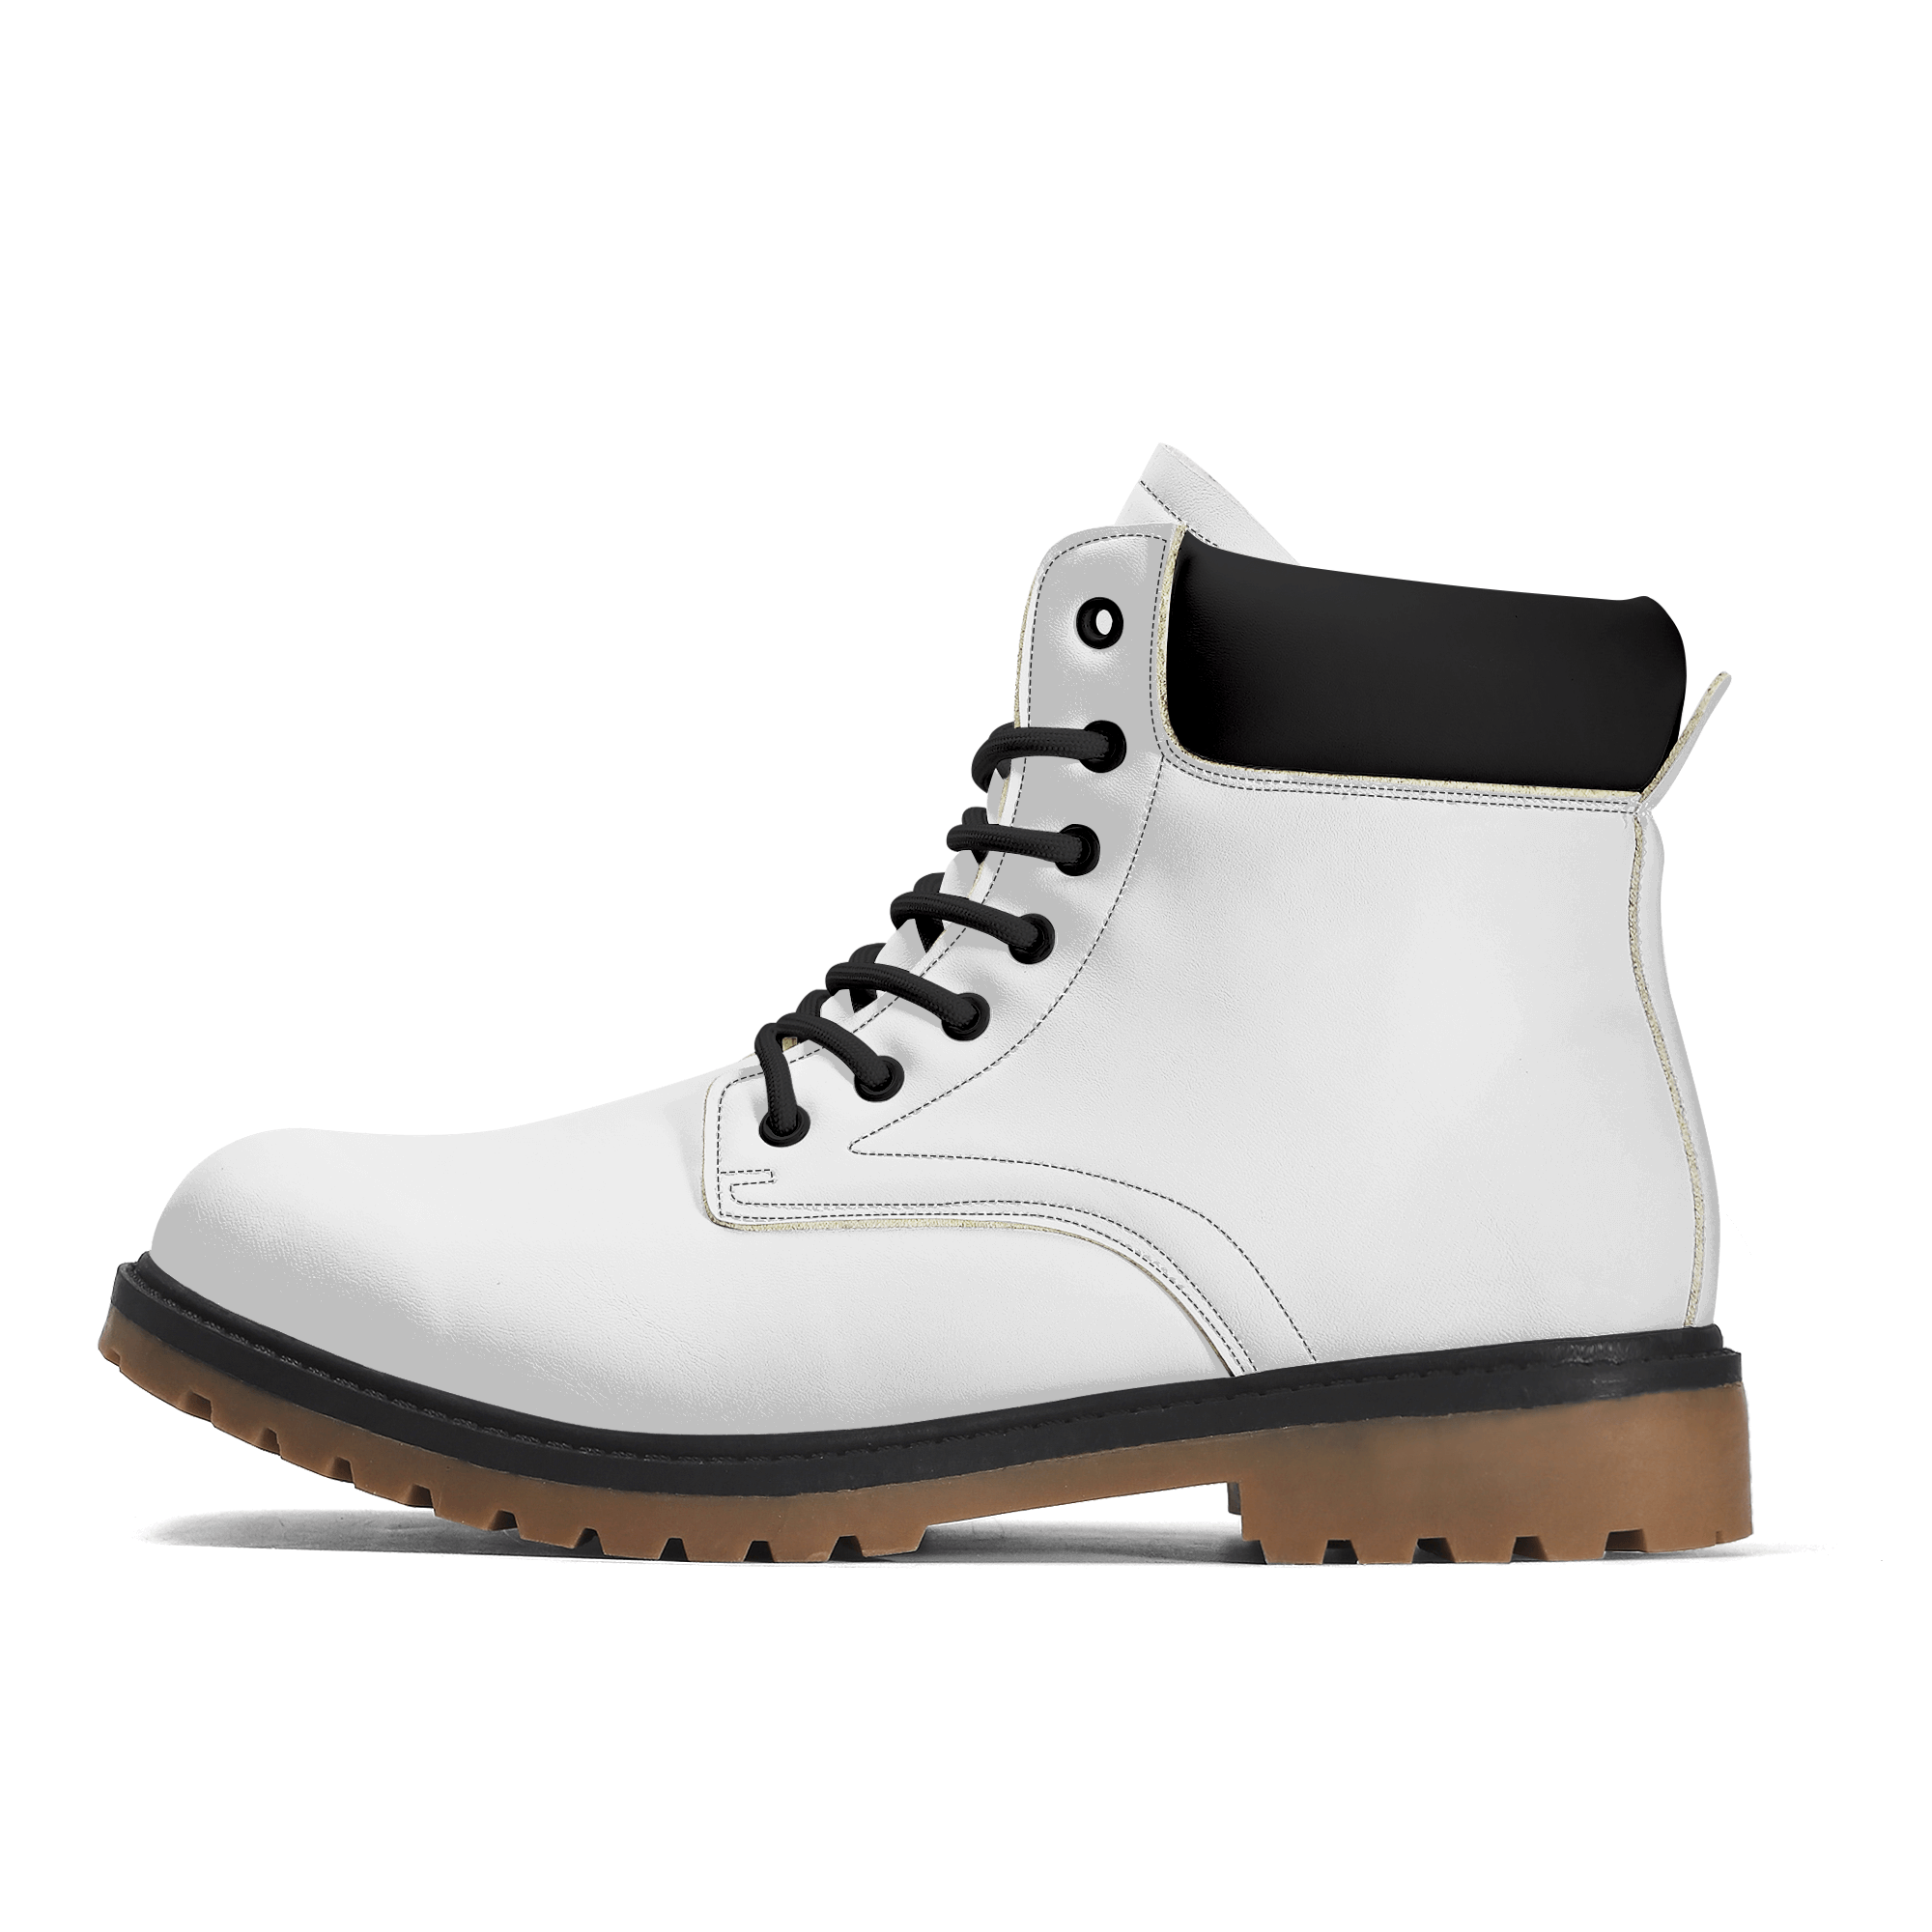 Customizable Vegan Leather Boots (Brown Outsole) - Design Your Own | Shoe Zero